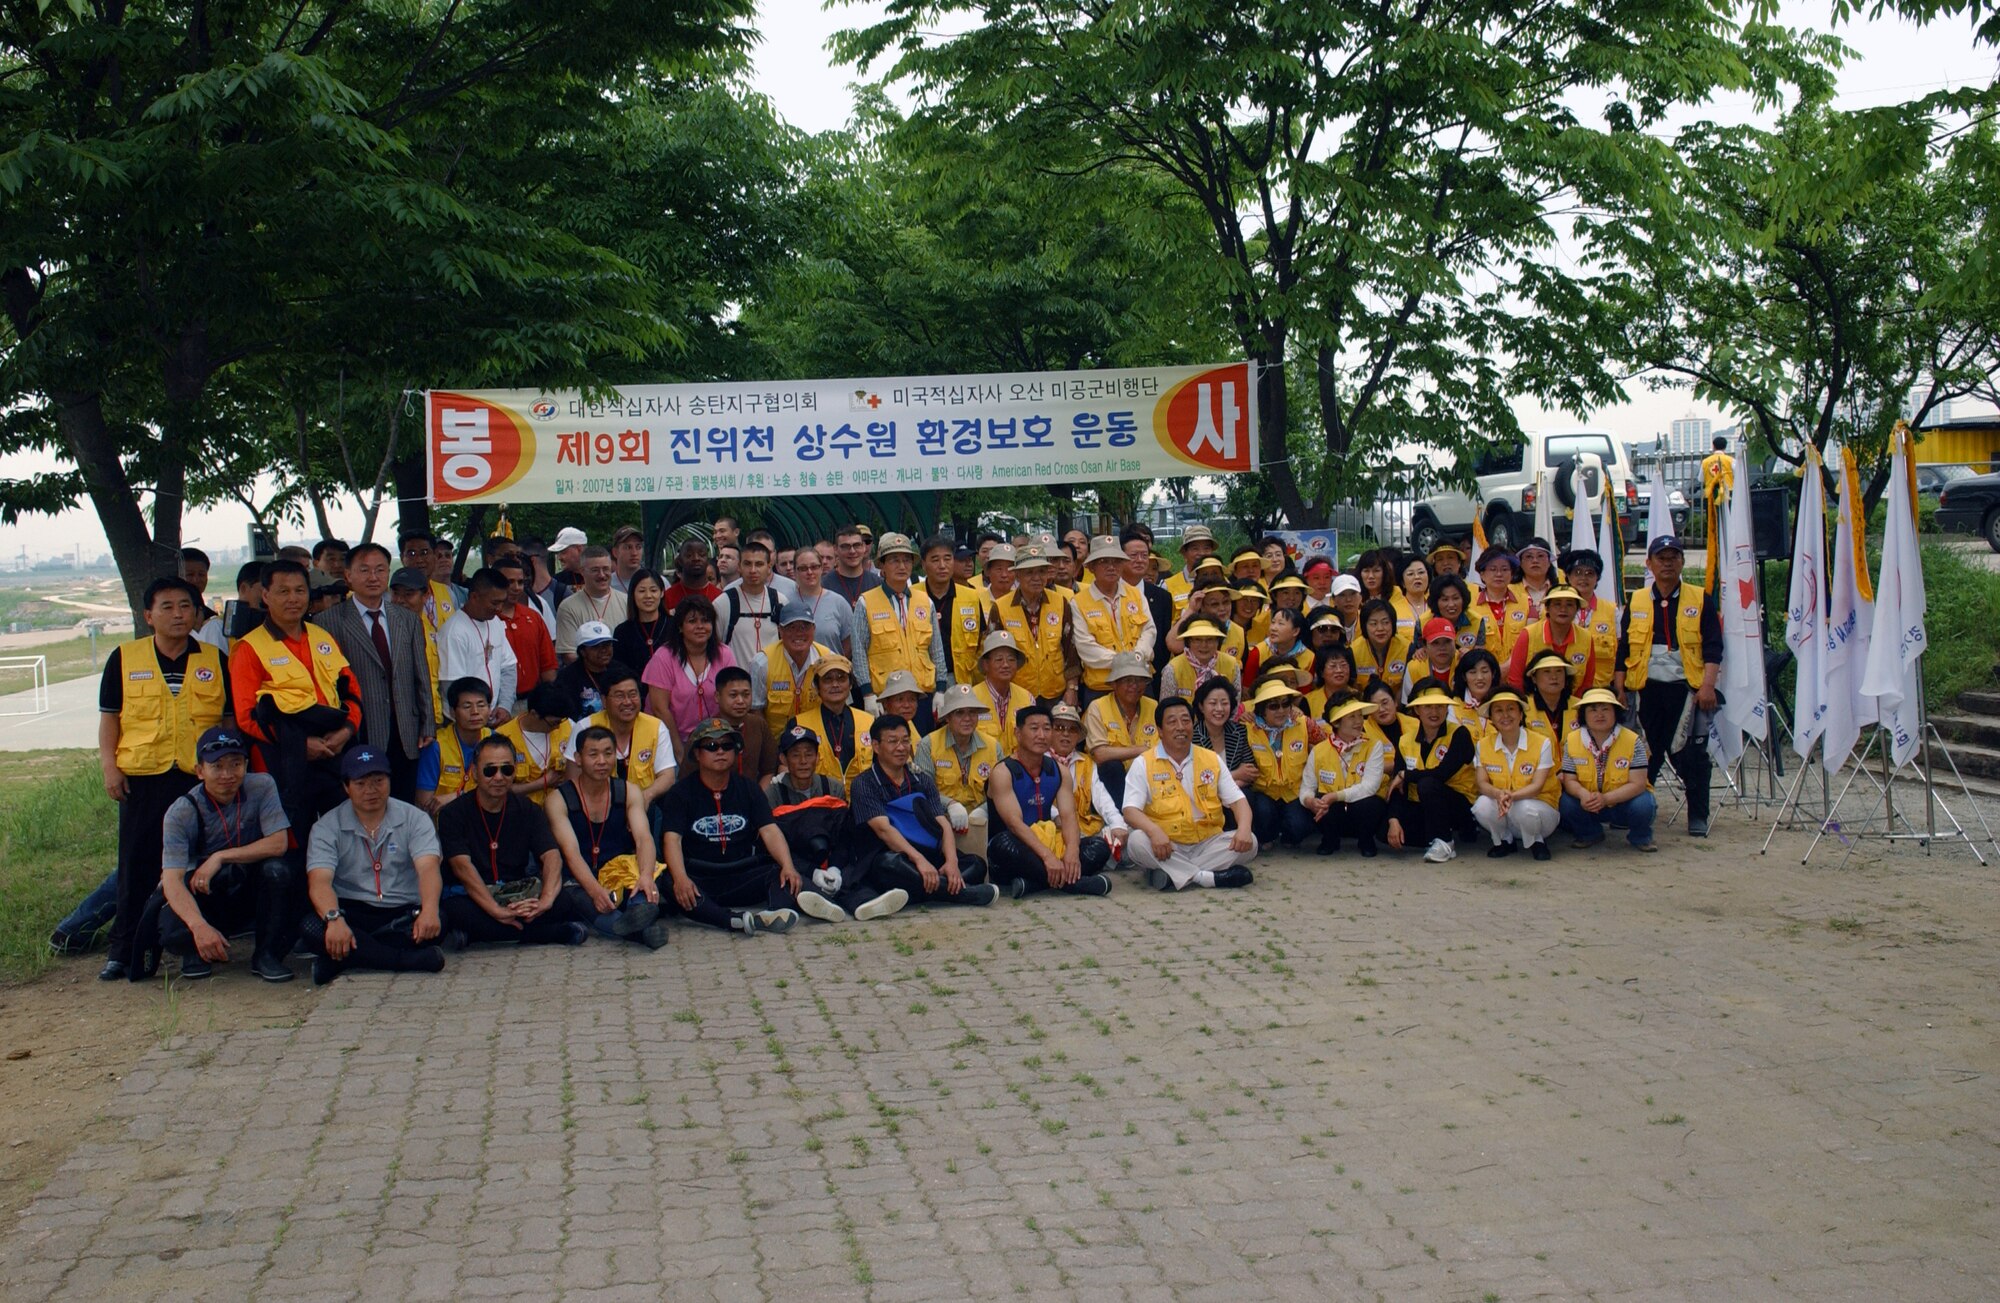 5/23/2007 – OSAN AIR BASE, Republic of Korea – 
 For the Annual Jin-wi River Clean-up, members of Team Osan, along with the Republic of Korea and Osan branches of the Red Cross, joined forces to pick up trash both along the banks of the river as well as in the water itself.  (U.S. Air Force photo by SSgt Christopher Marasky)

